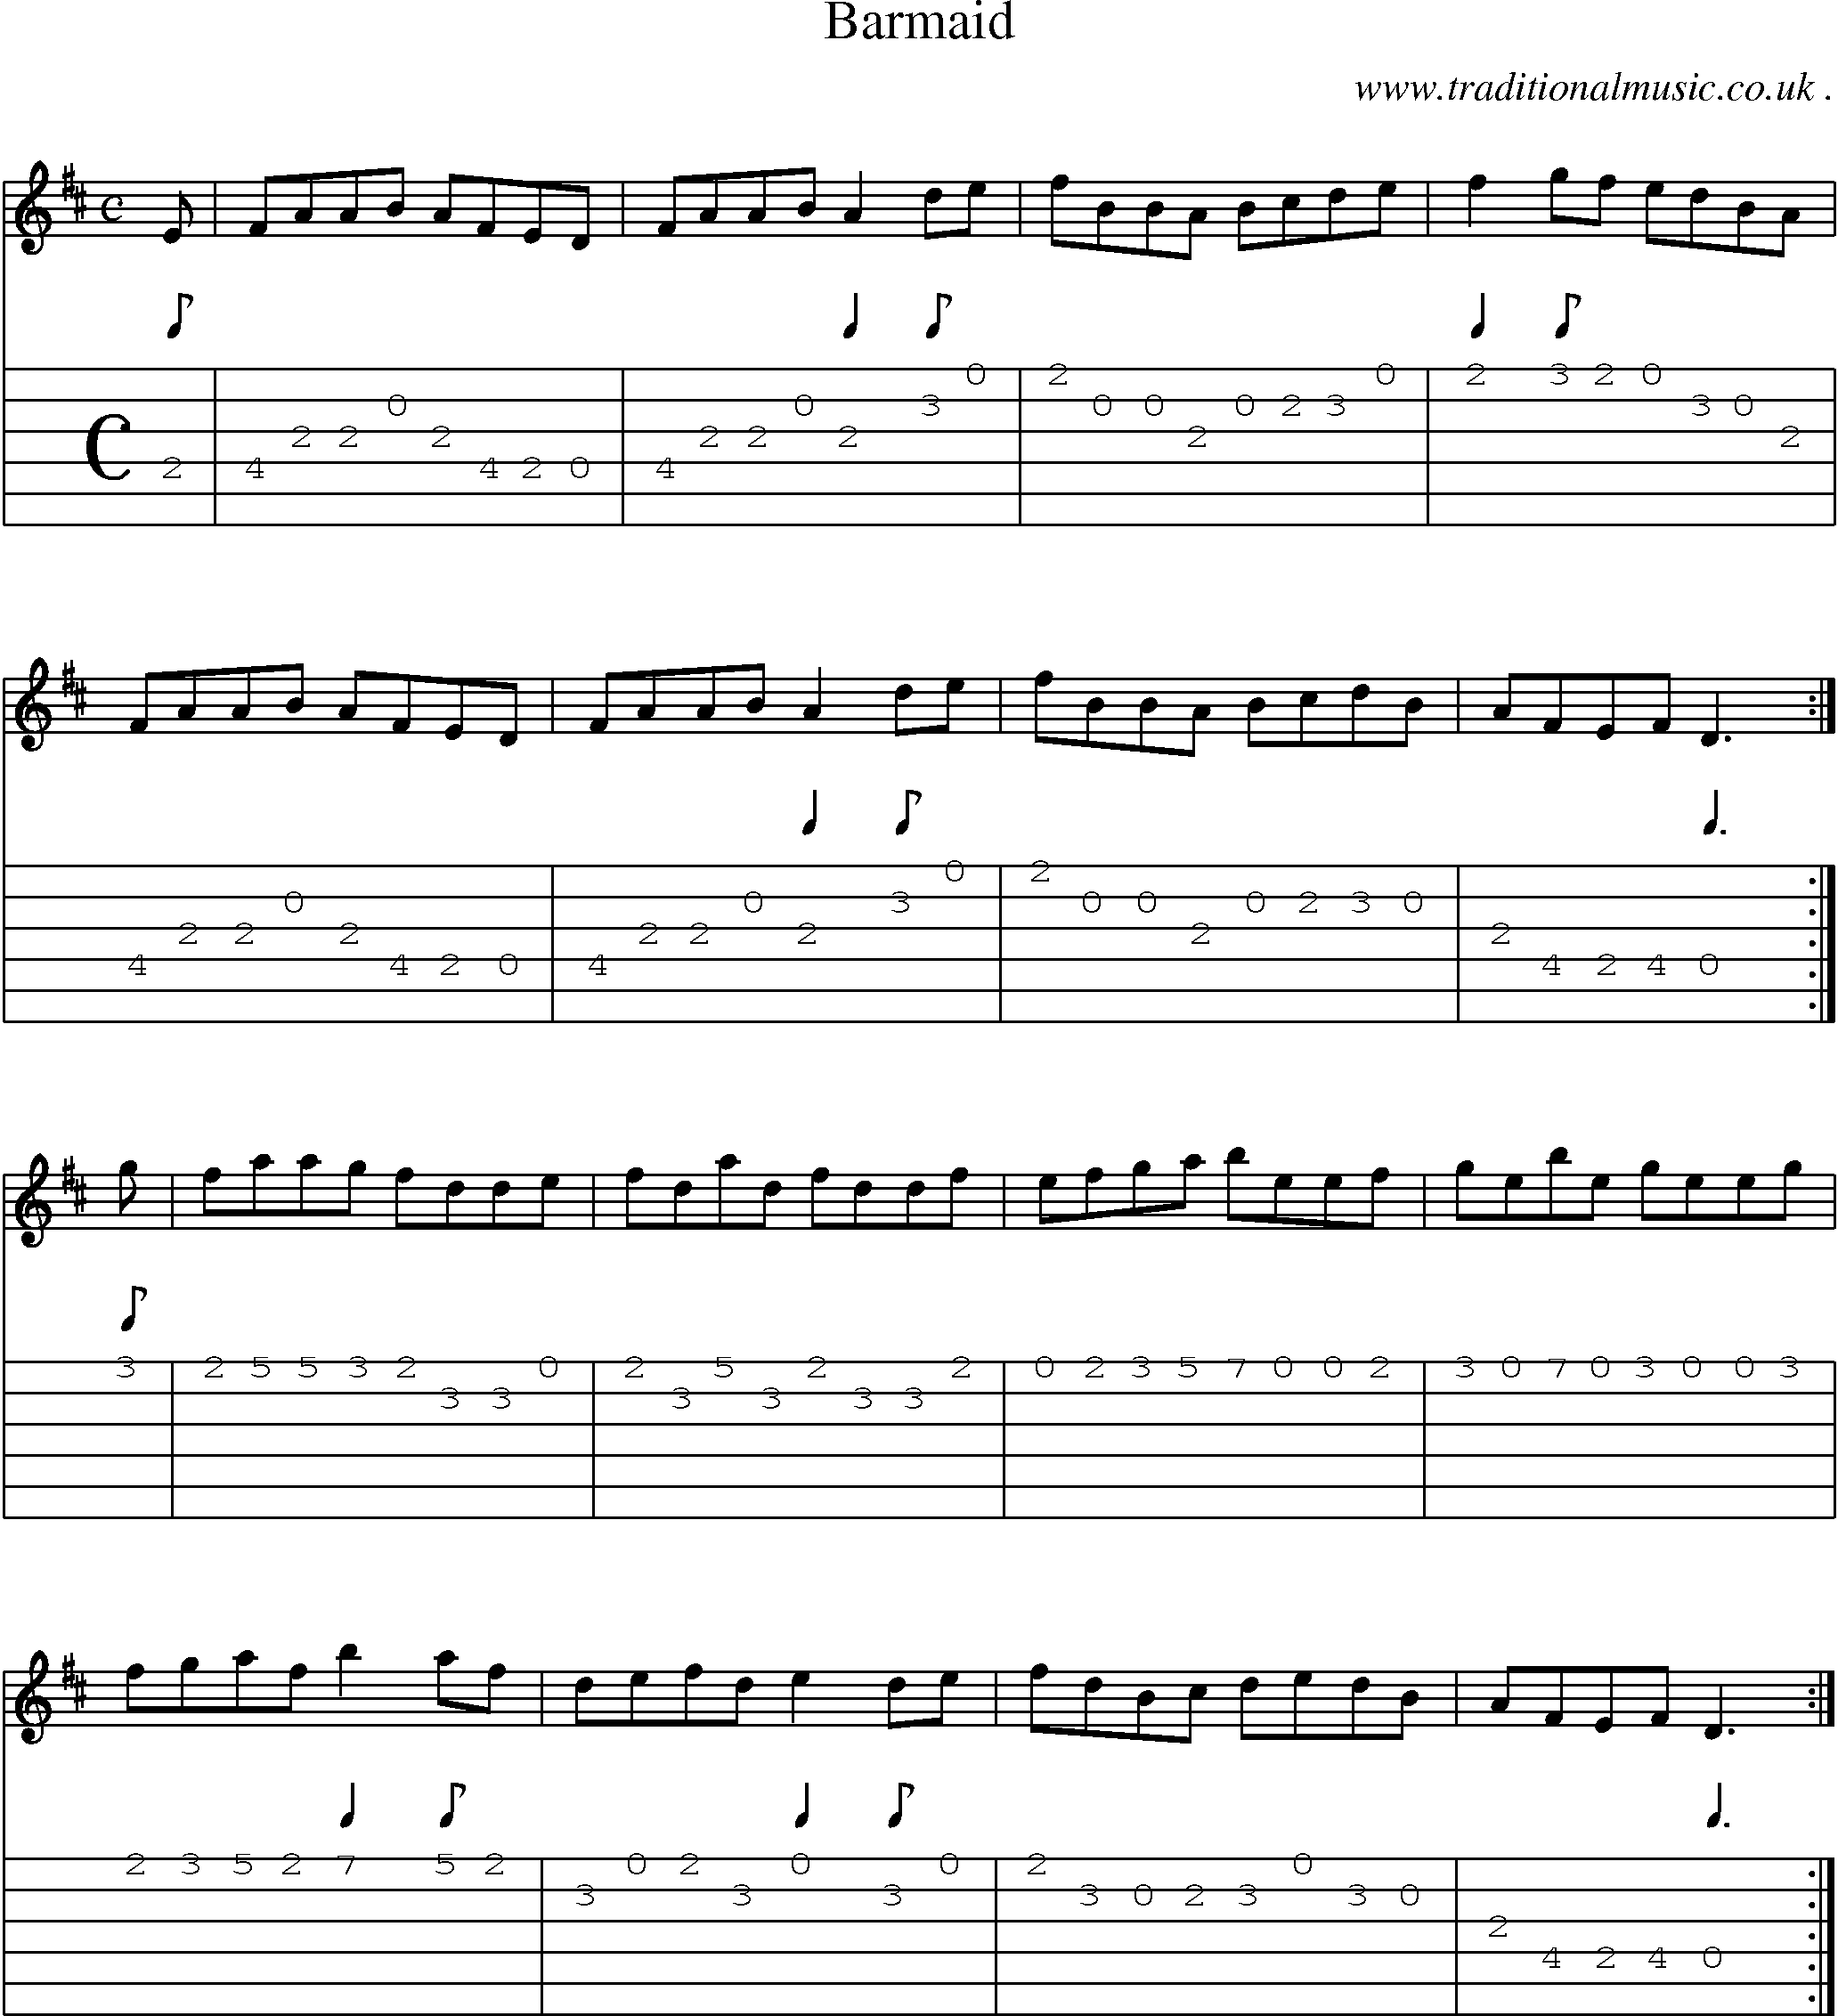 Sheet-Music and Guitar Tabs for Barmaid